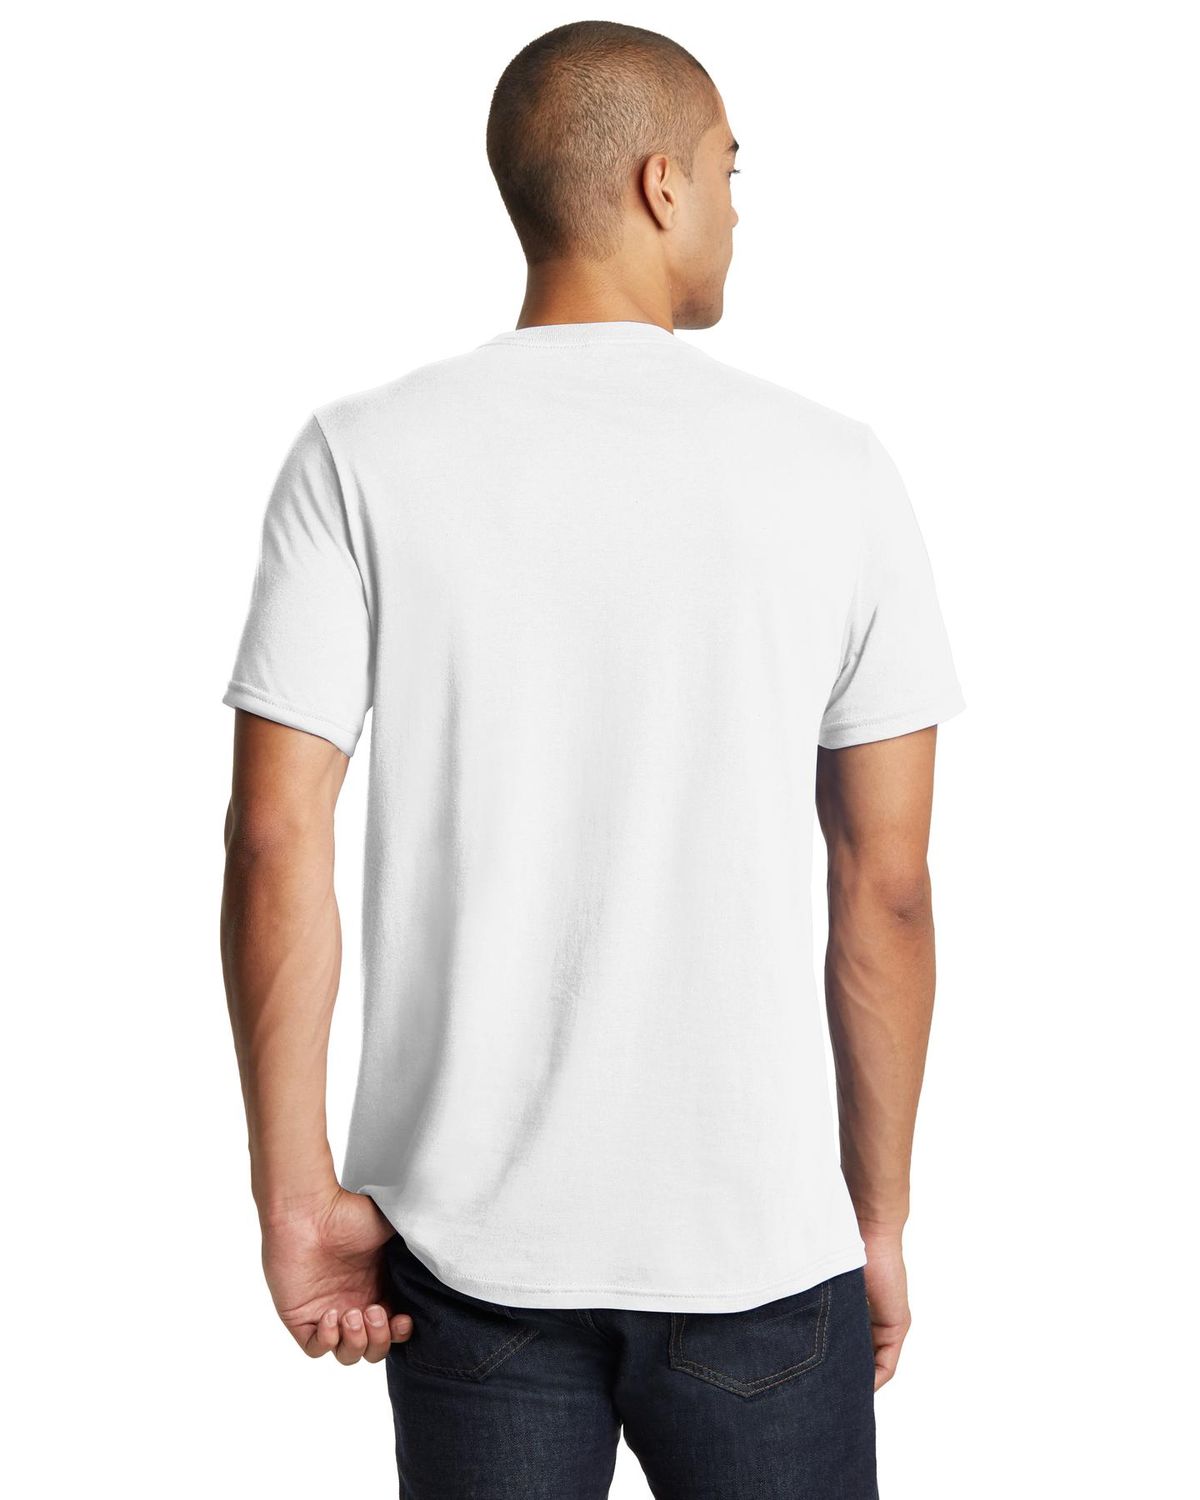 'District DT7000 Young Mens Bouncer Tee'